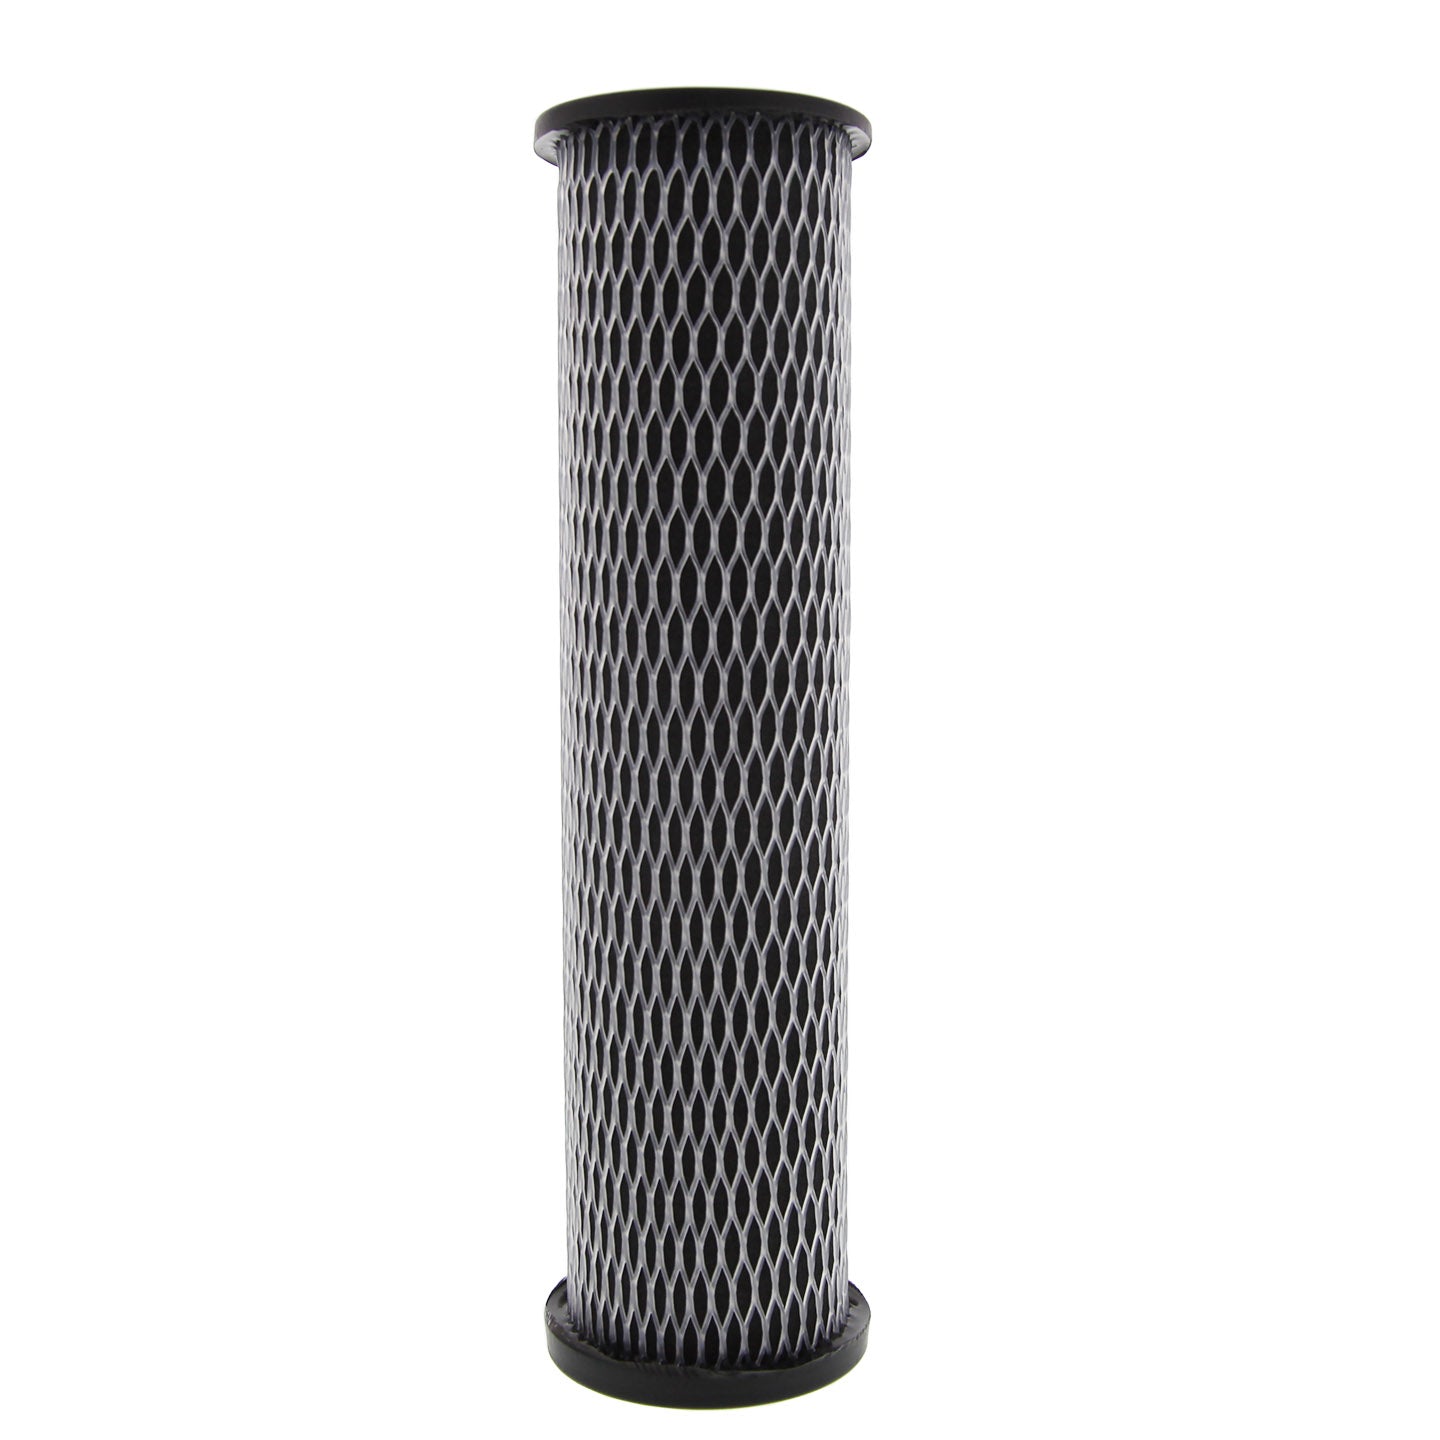 OmniFilter TO1SS / Pentek TO1 Whole House Filter Replacement Cartridge